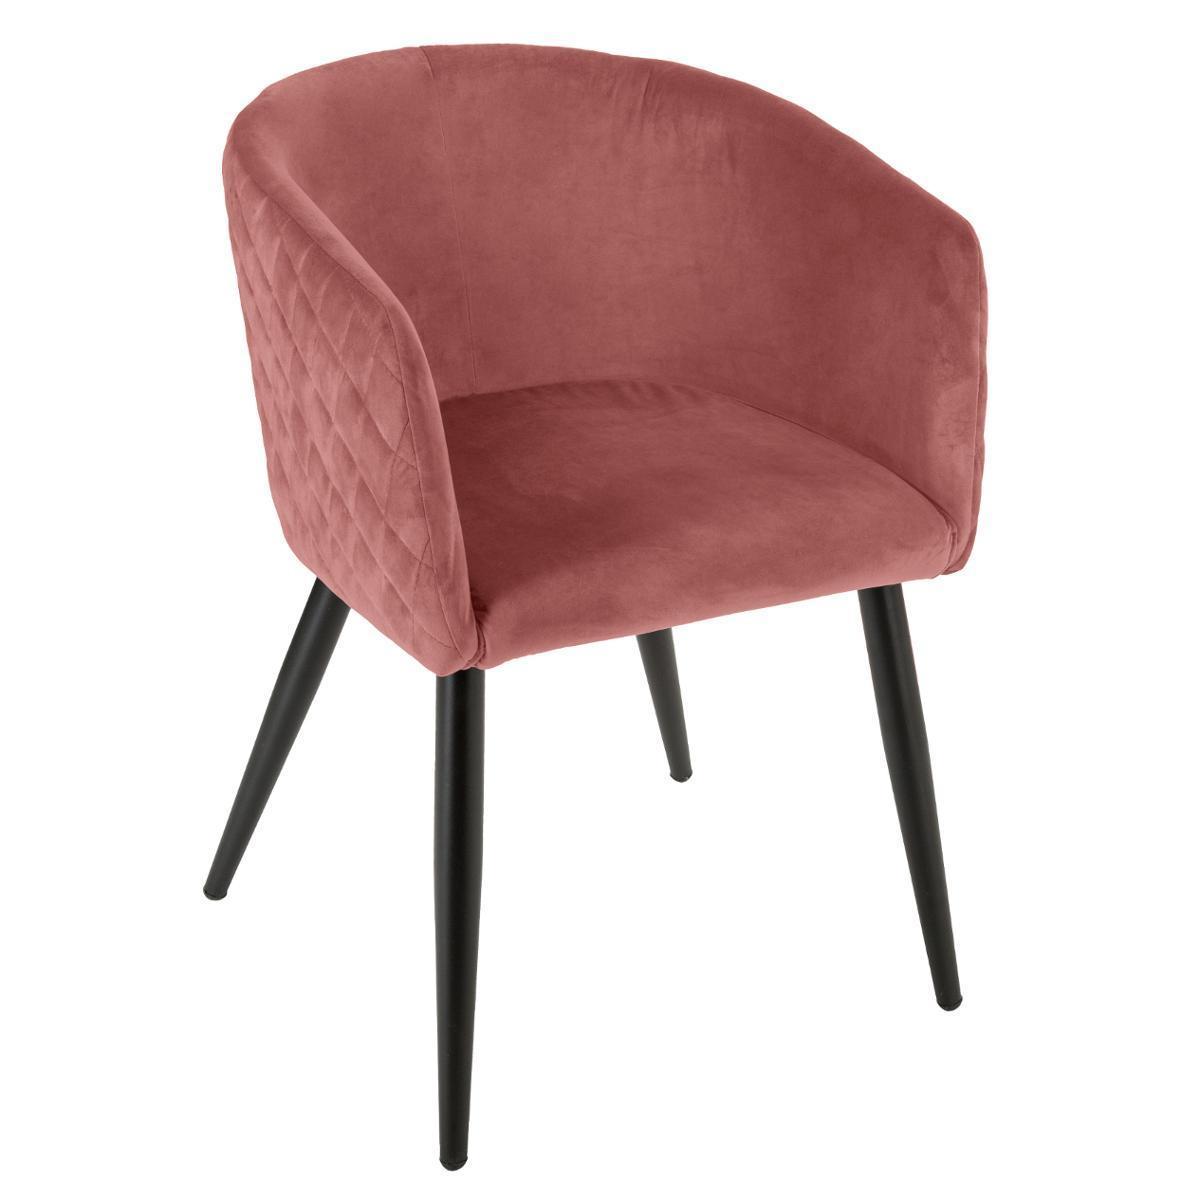 Fauteuil diner velours blush marlo